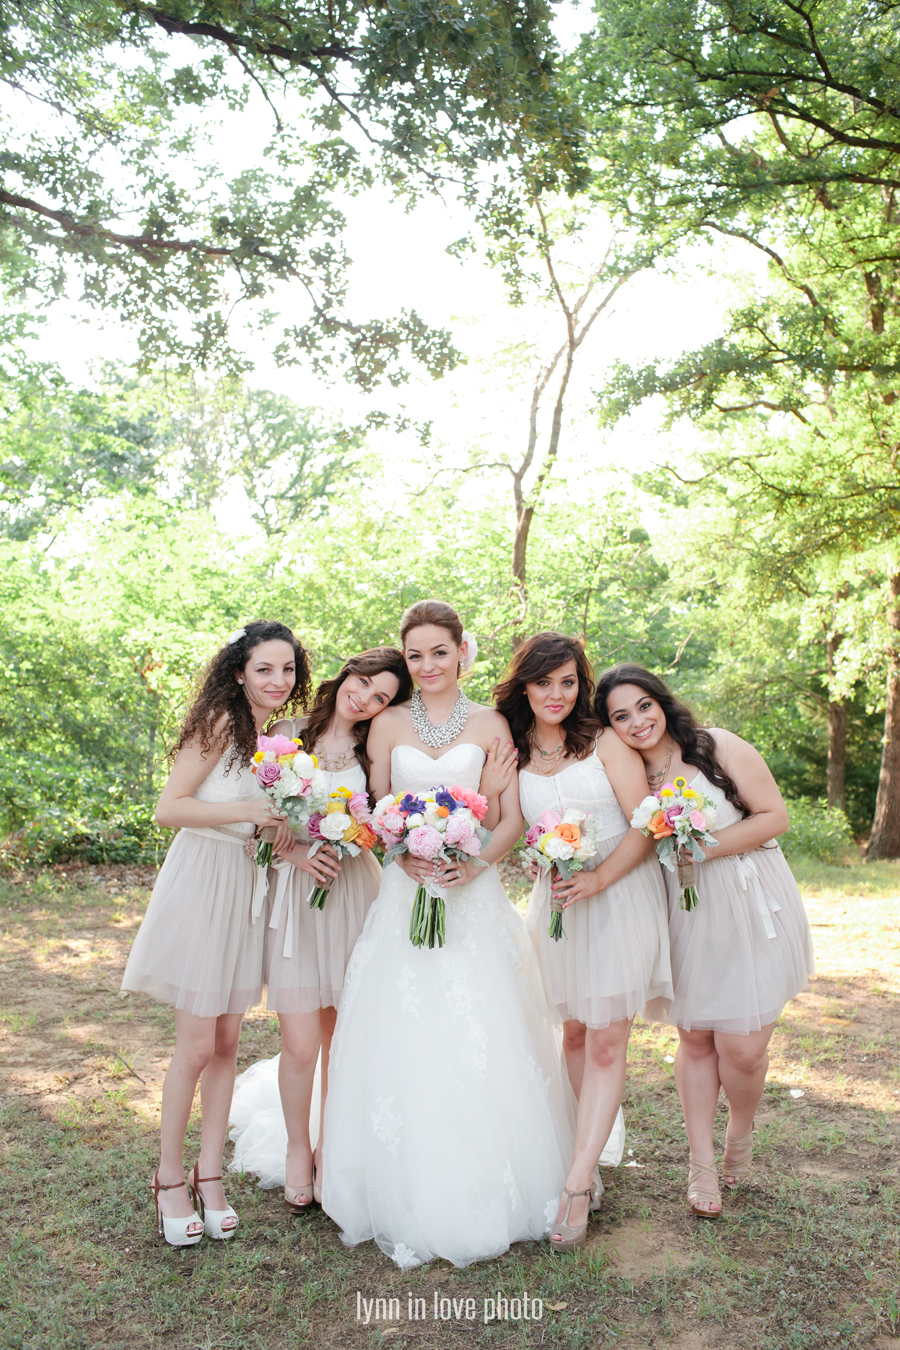 Gabi and Oscar Brazilian Vintage Glam Outdoor Wedding with gorgeous bridal party with anthropologie inspired bridesmaid dresses by Lynn in Love Photo, Dallas Wedding Photographer